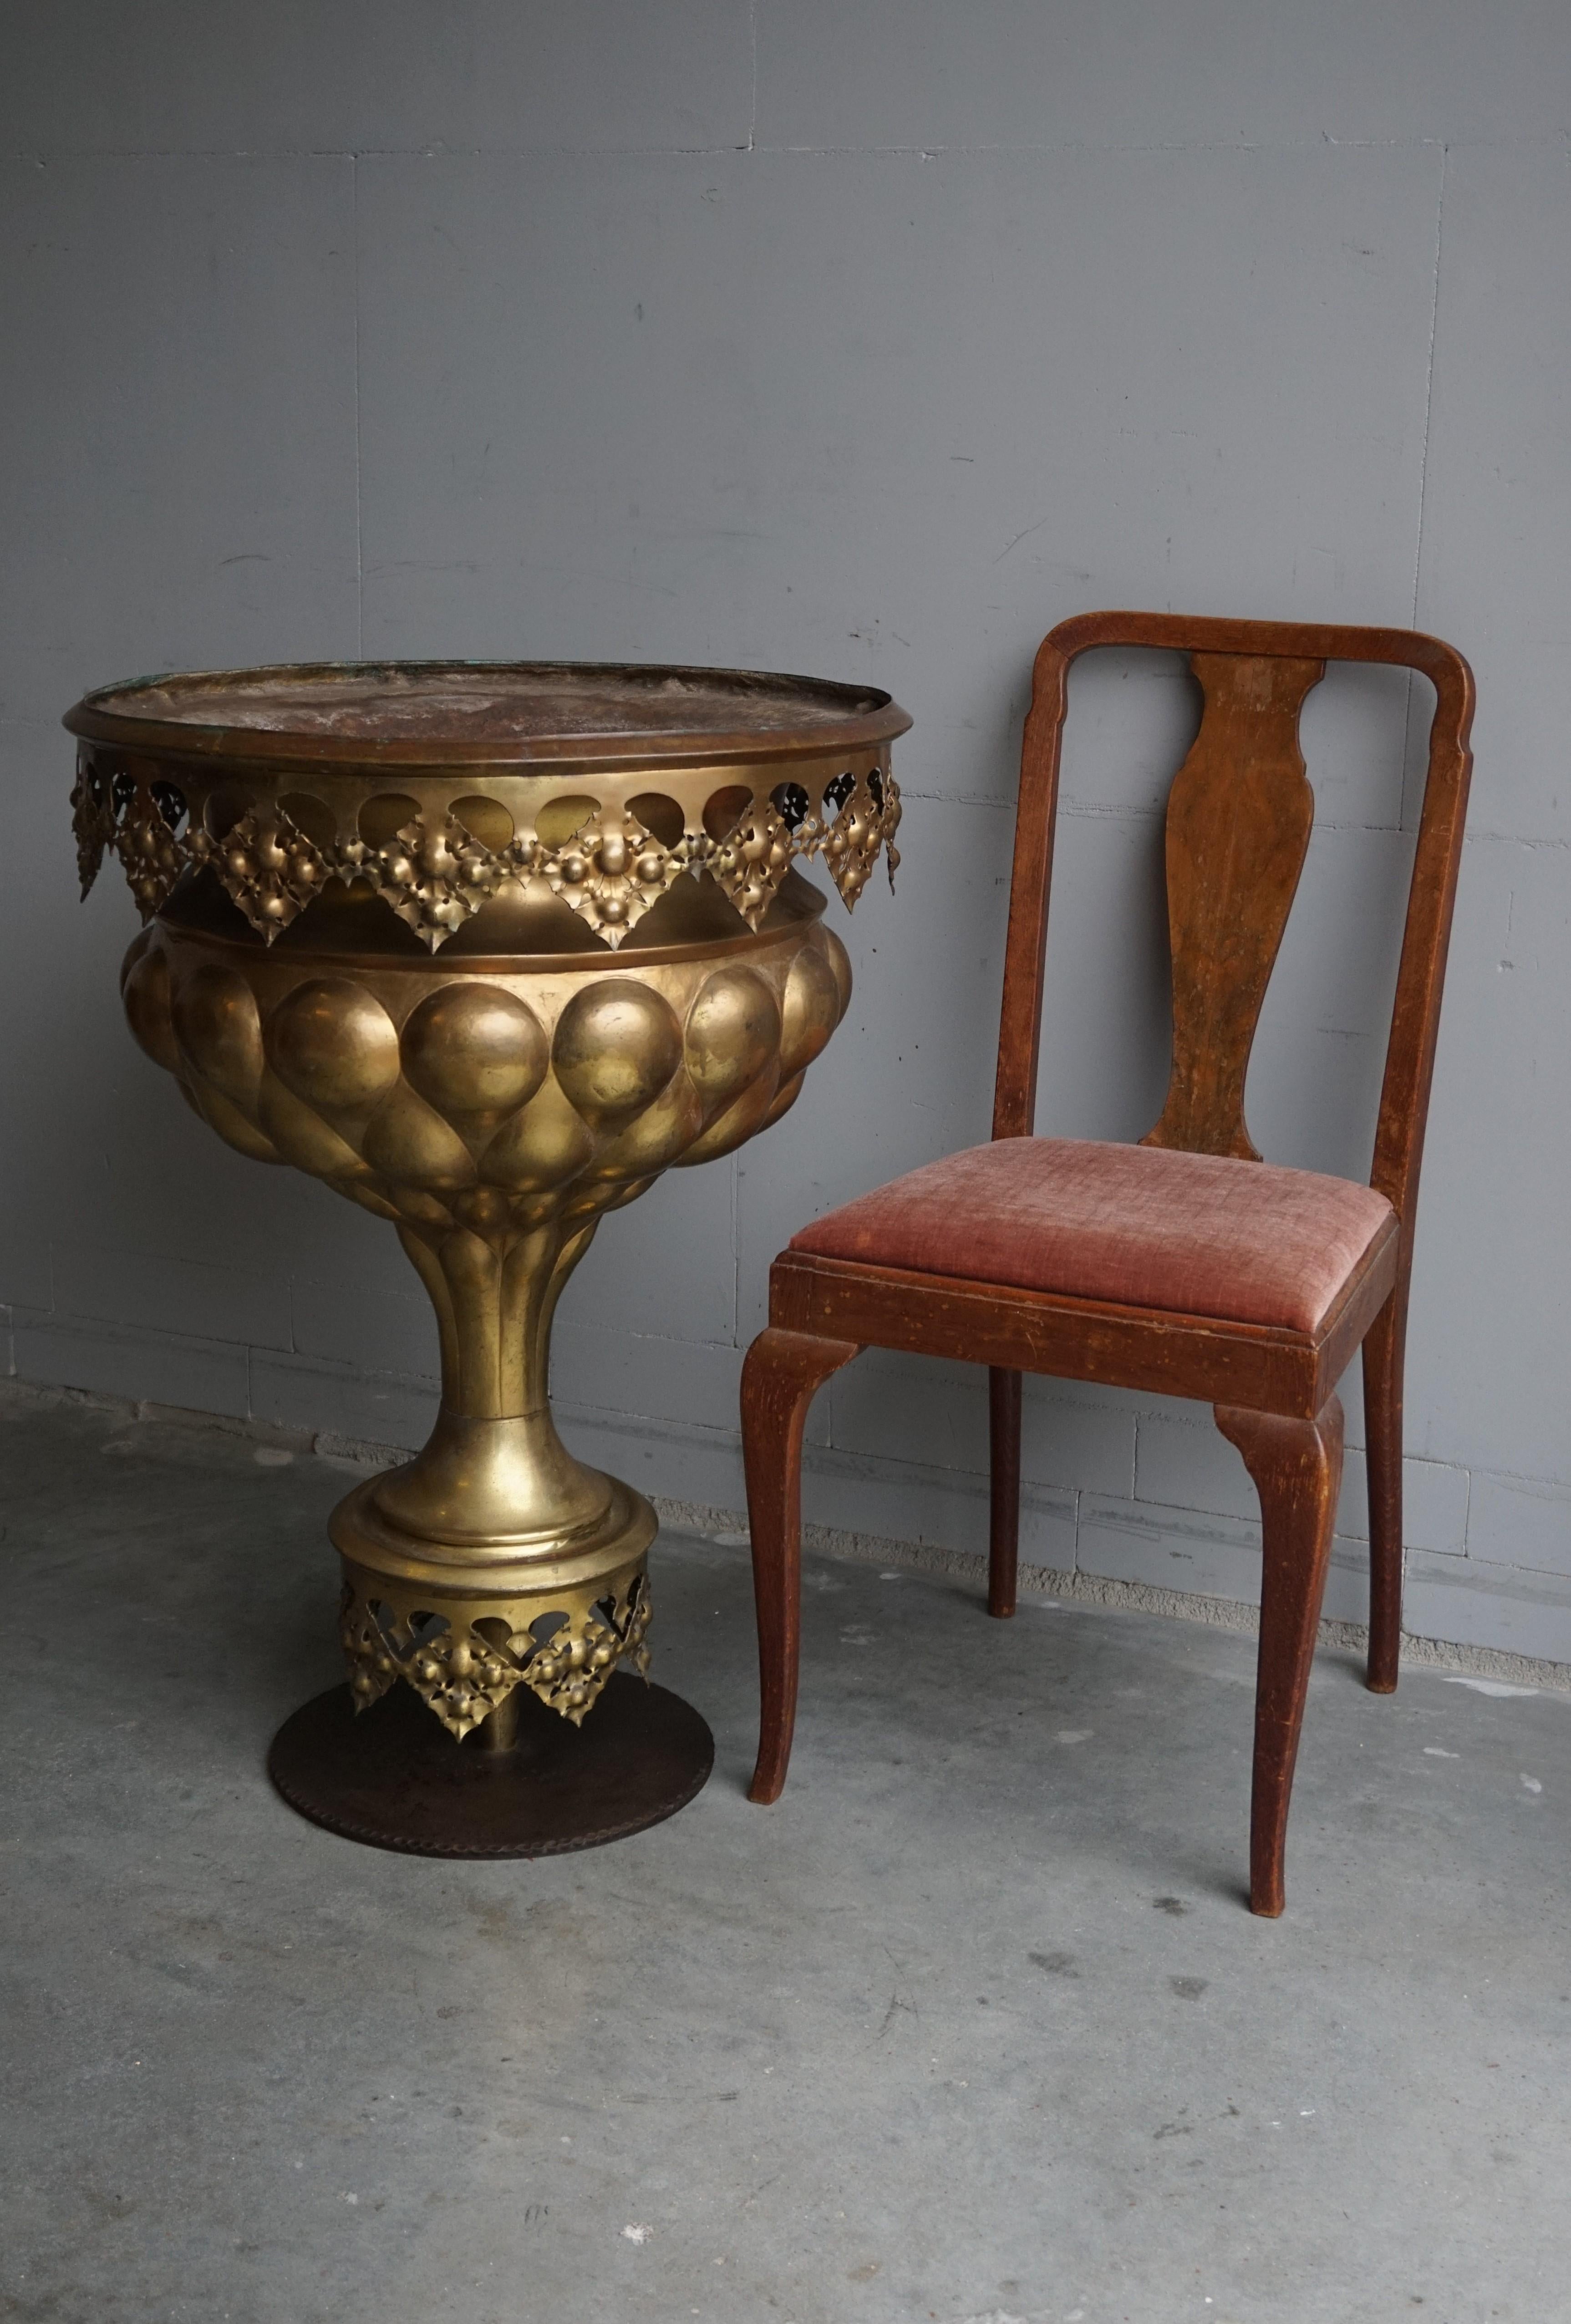 Stunning Antique Brass Gothic Revival Former Church Baptismal Font Planter Stand For Sale 7